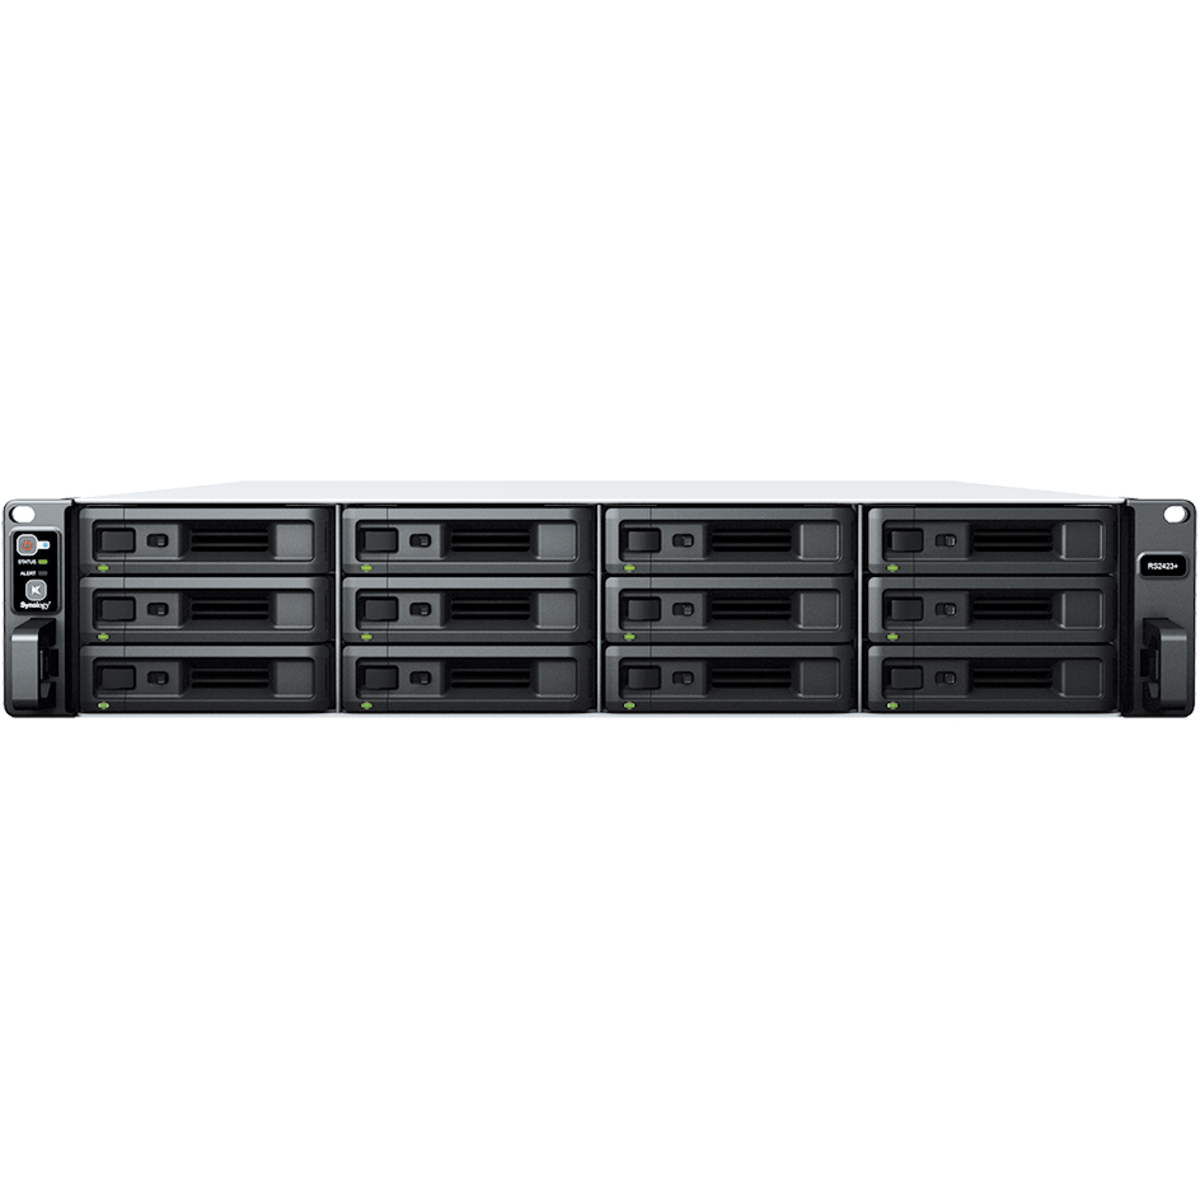 buy Synology RackStation RS2423+ RackMount NAS - Network Attached Storage Device Burn-In Tested Configurations - nas headquarters buy network attached storage server device das new raid-5 free shipping usa RackStation RS2423+